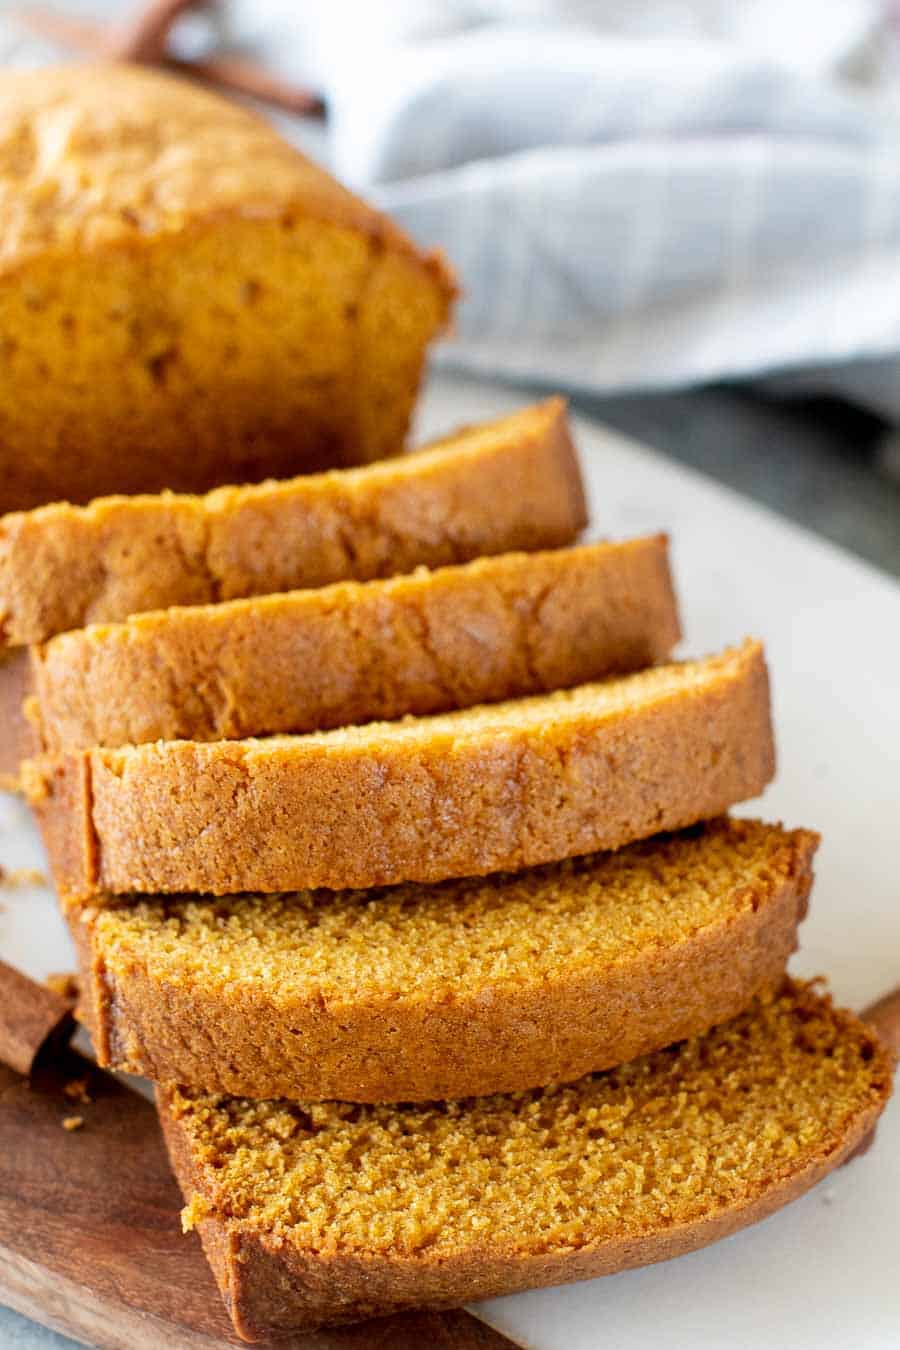 Smoked pumpkin bread slices on cutting board